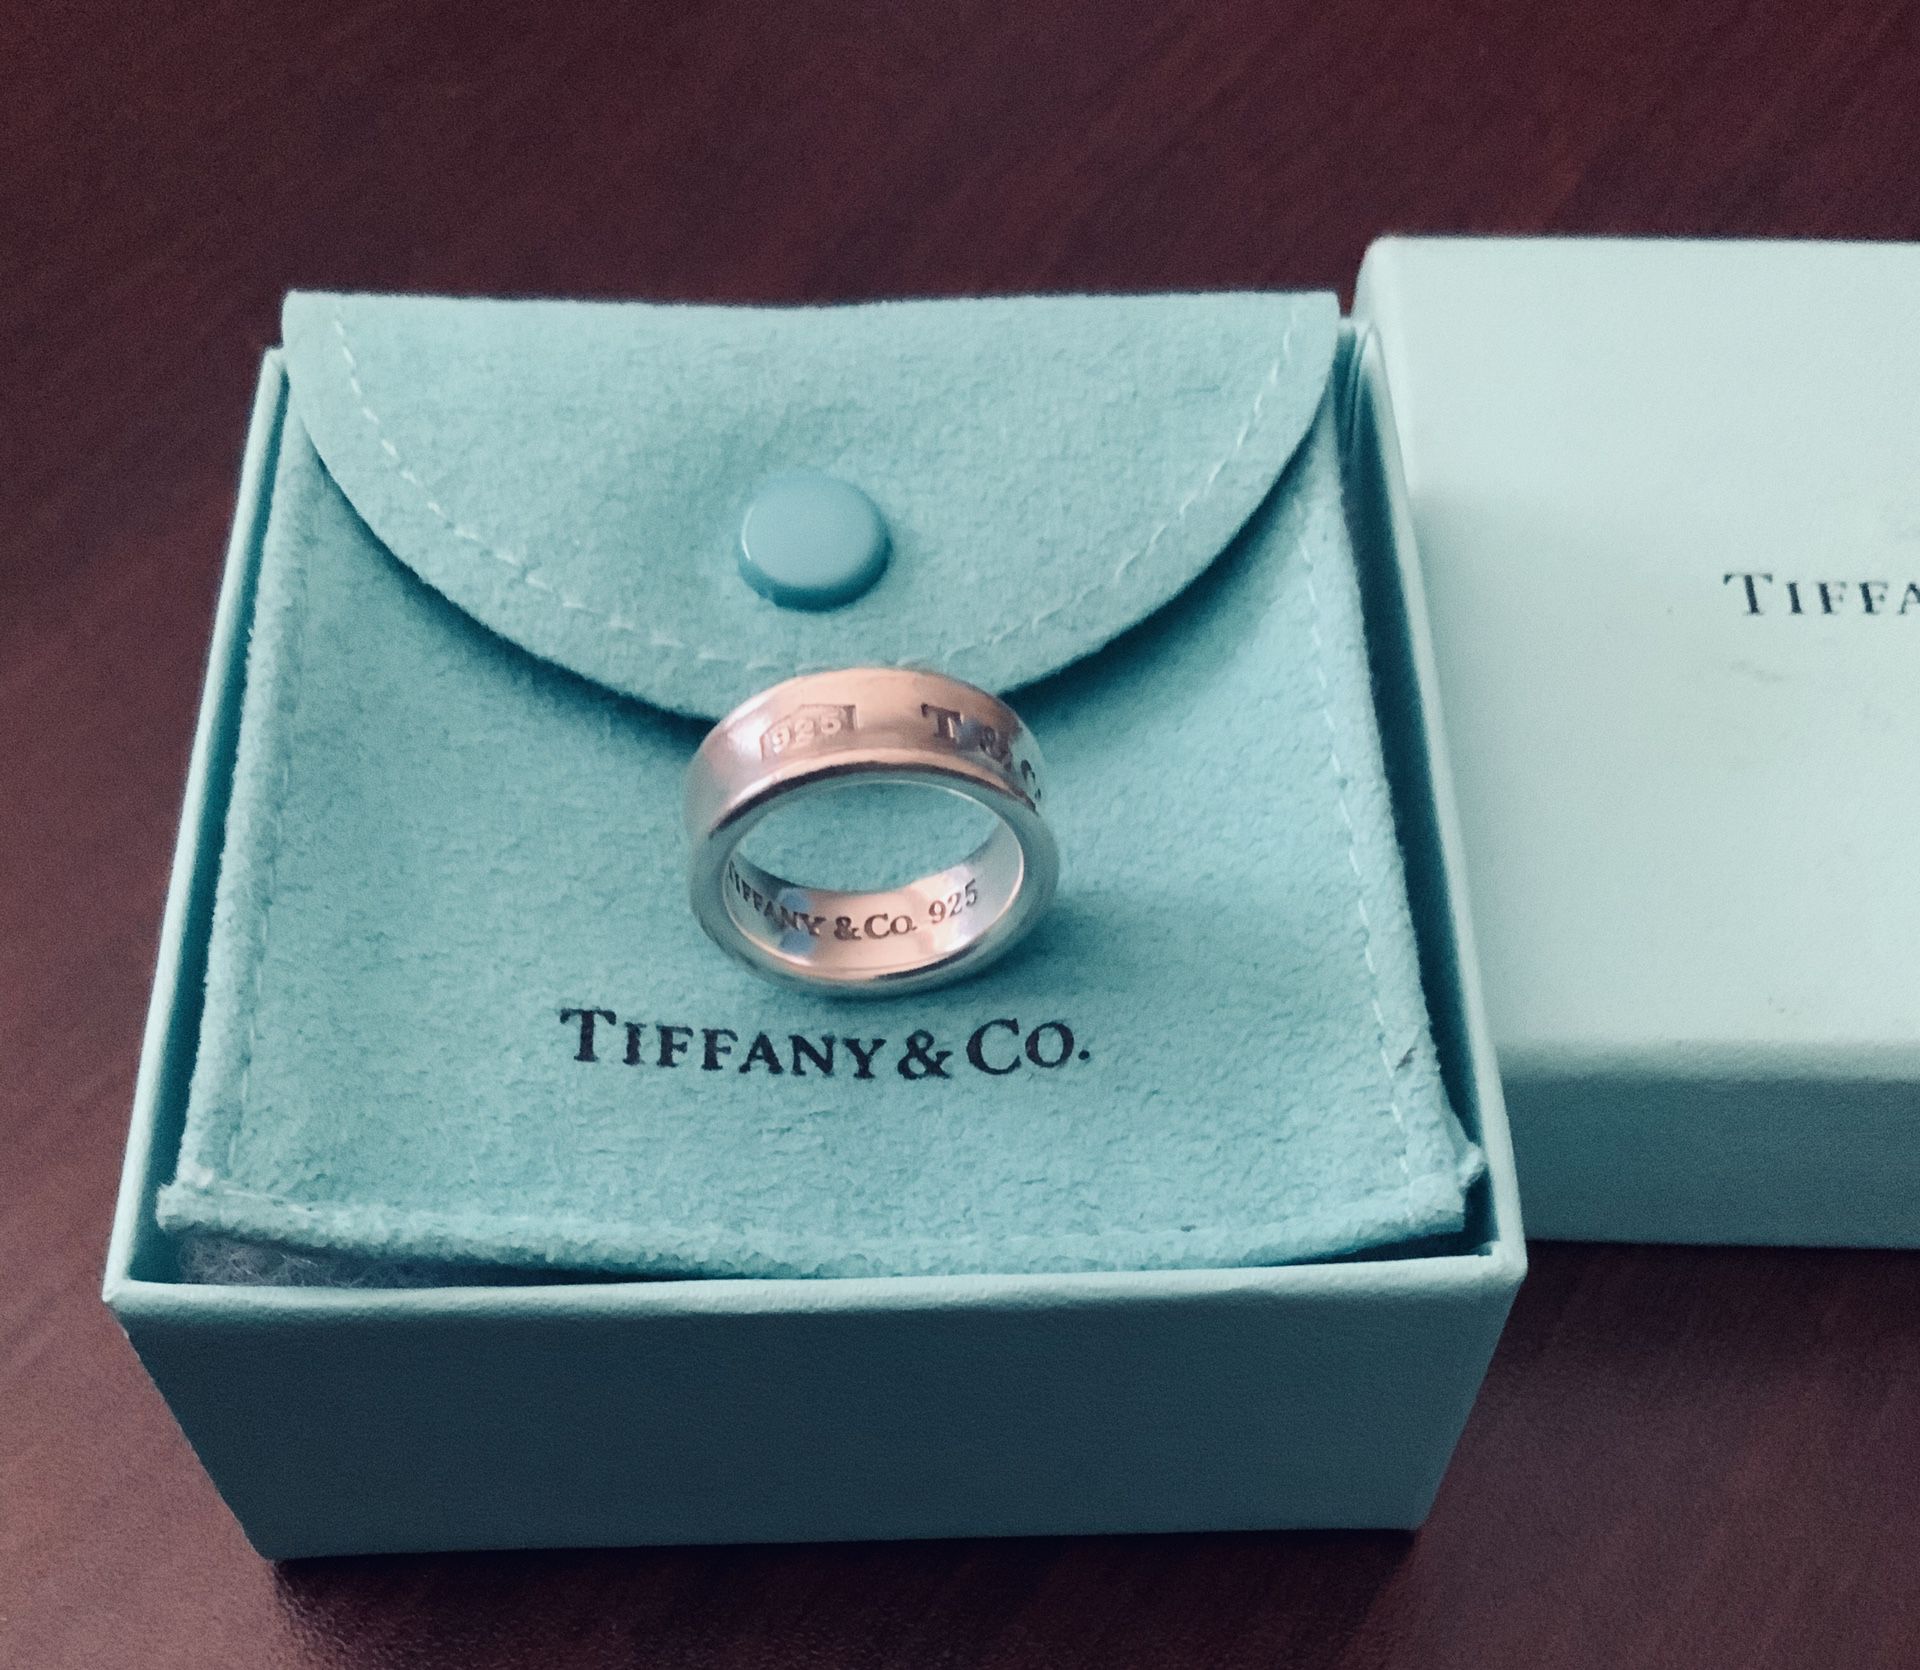 AUTHENTIC EXCELLENT CONDITION TIFFANY & CO 925 RING SIZE 5.5